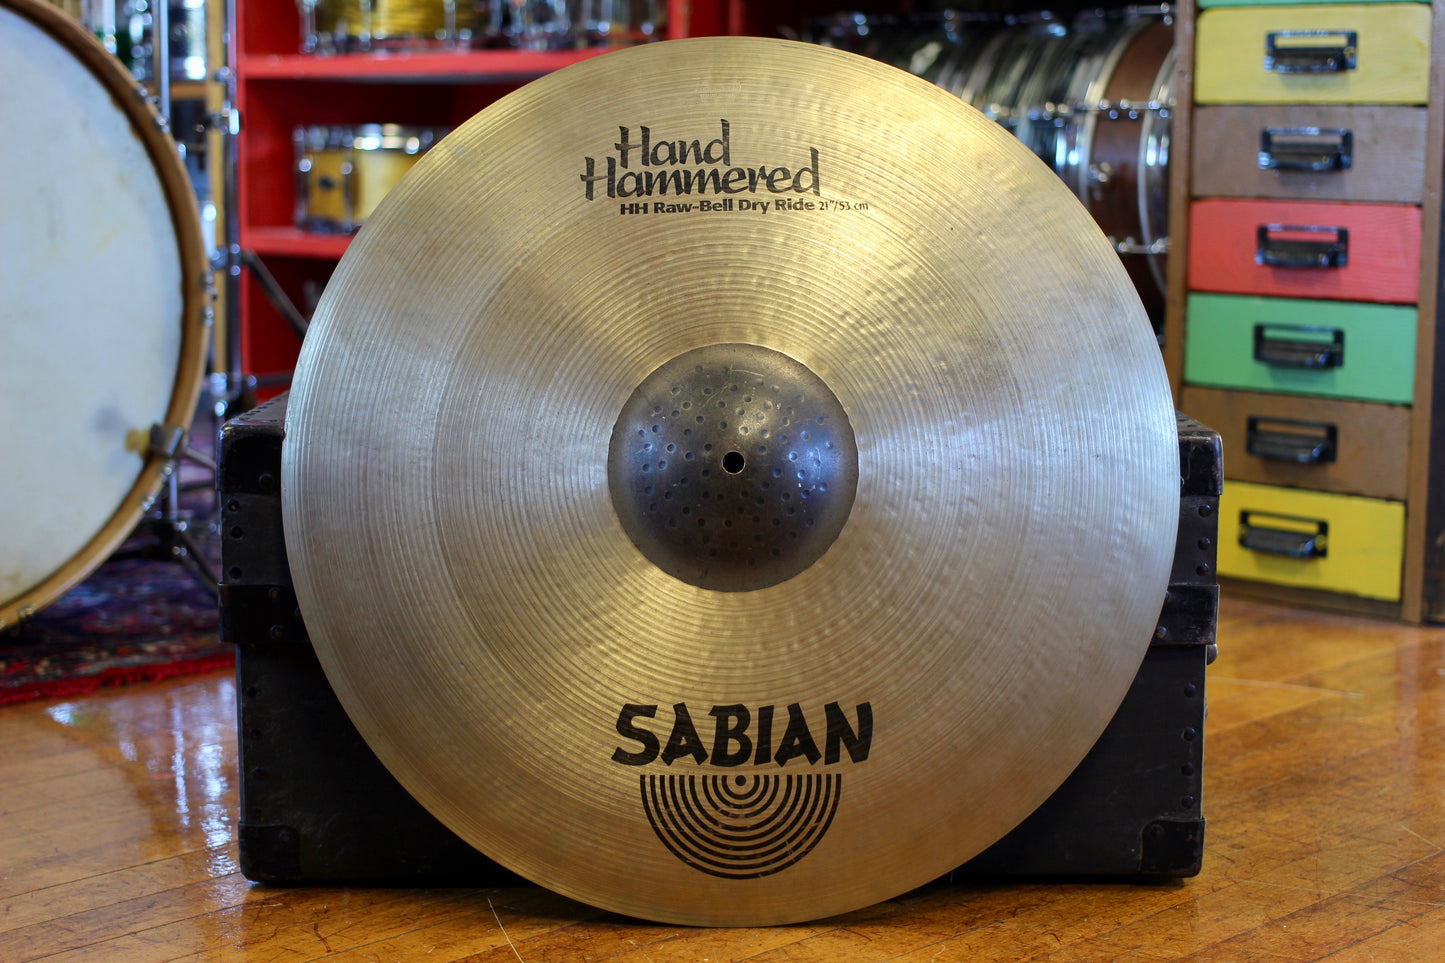 Sabian HH Raw-Bell Dry 21" Ride Cymbal 3311g - USED